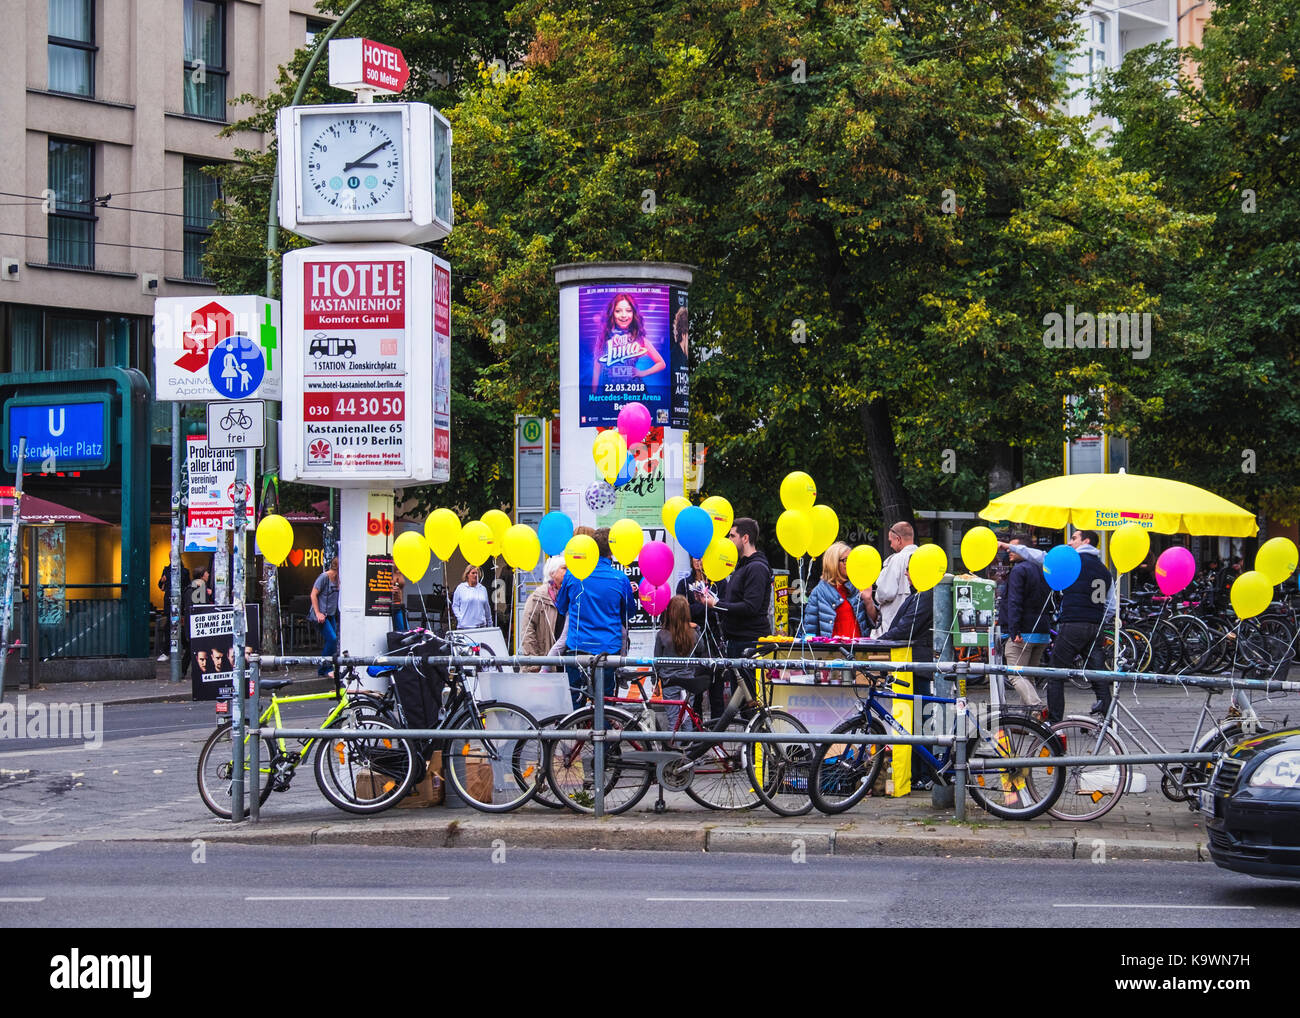 Berlin, Germany. 23rd September, 2017. Supporters of the FDP Free Democratic Party campaigning at Rosenthalerplatz on eve of German Federal Election 2017 Credit: Eden Breitz/Alamy Live News Stock Photo